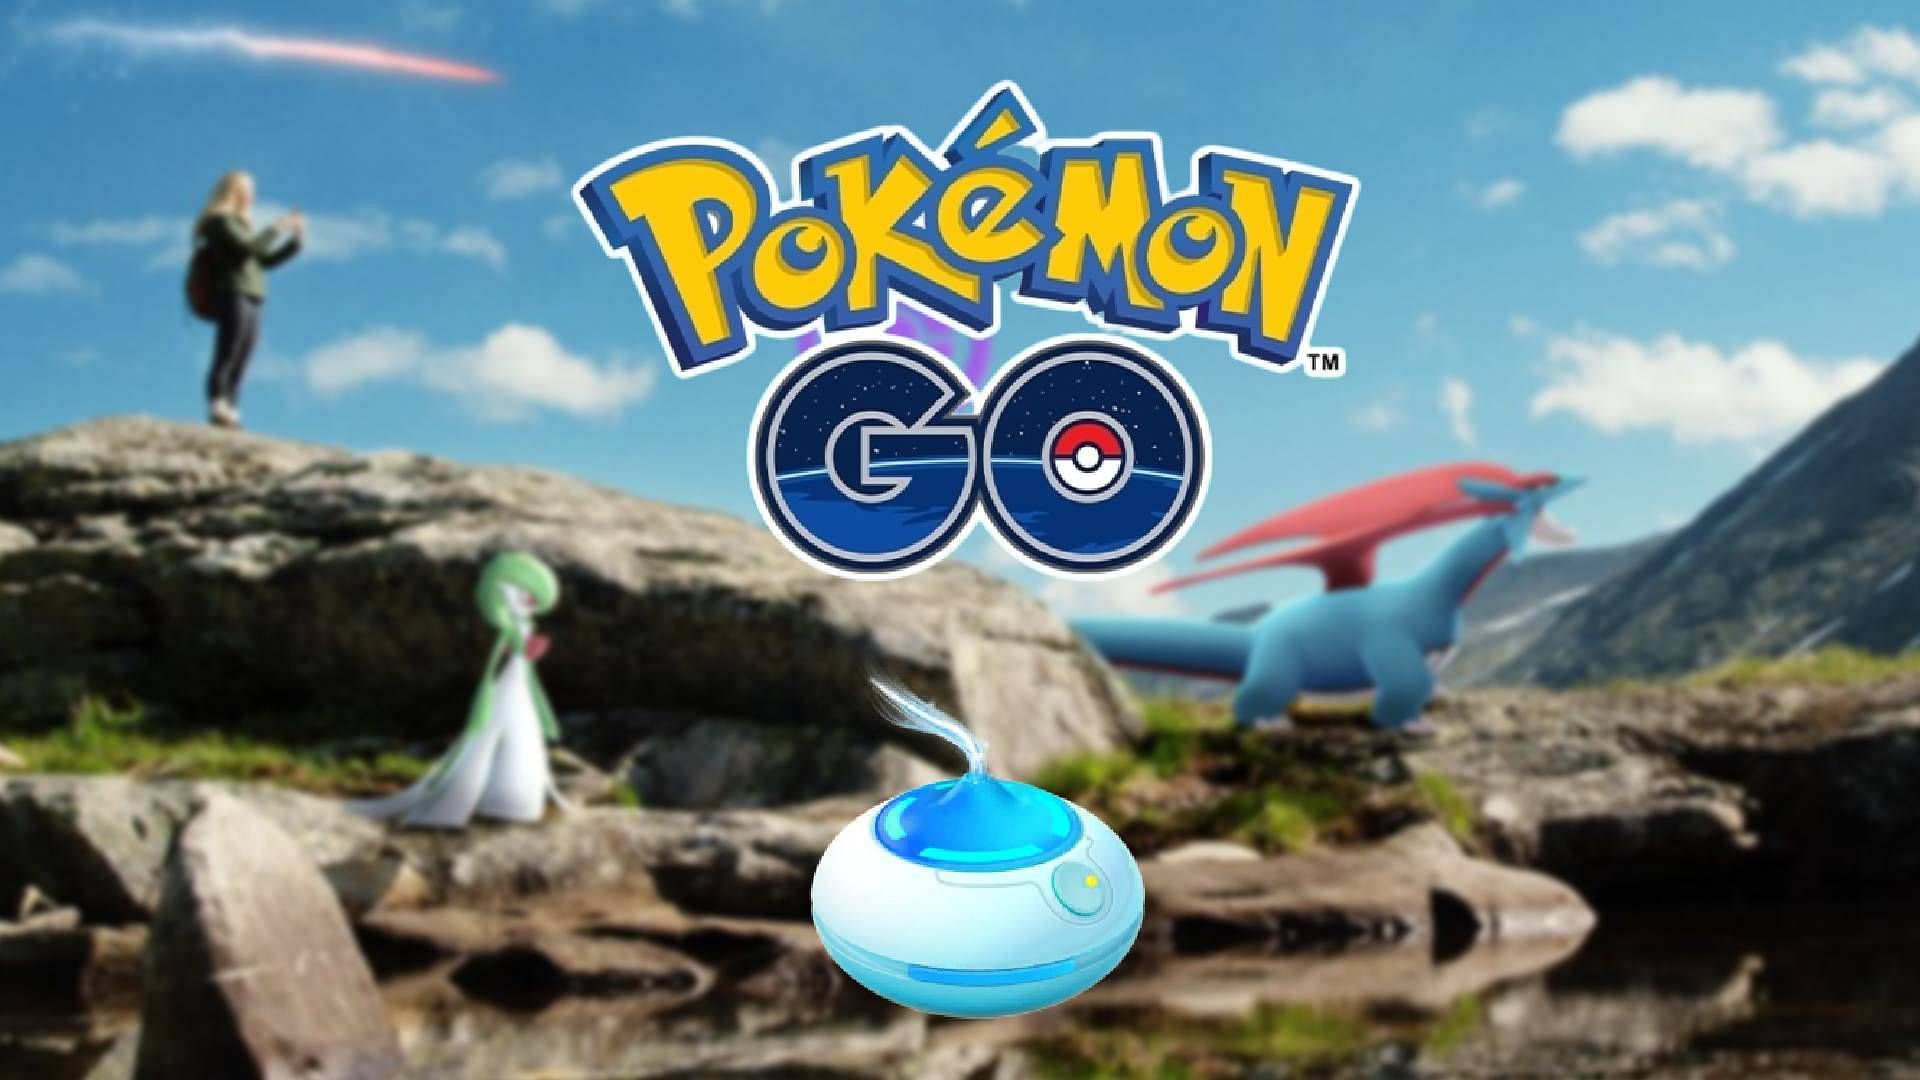 The Daily Adventure Incense as it appears in Pokemon GO (Image via Niantic)